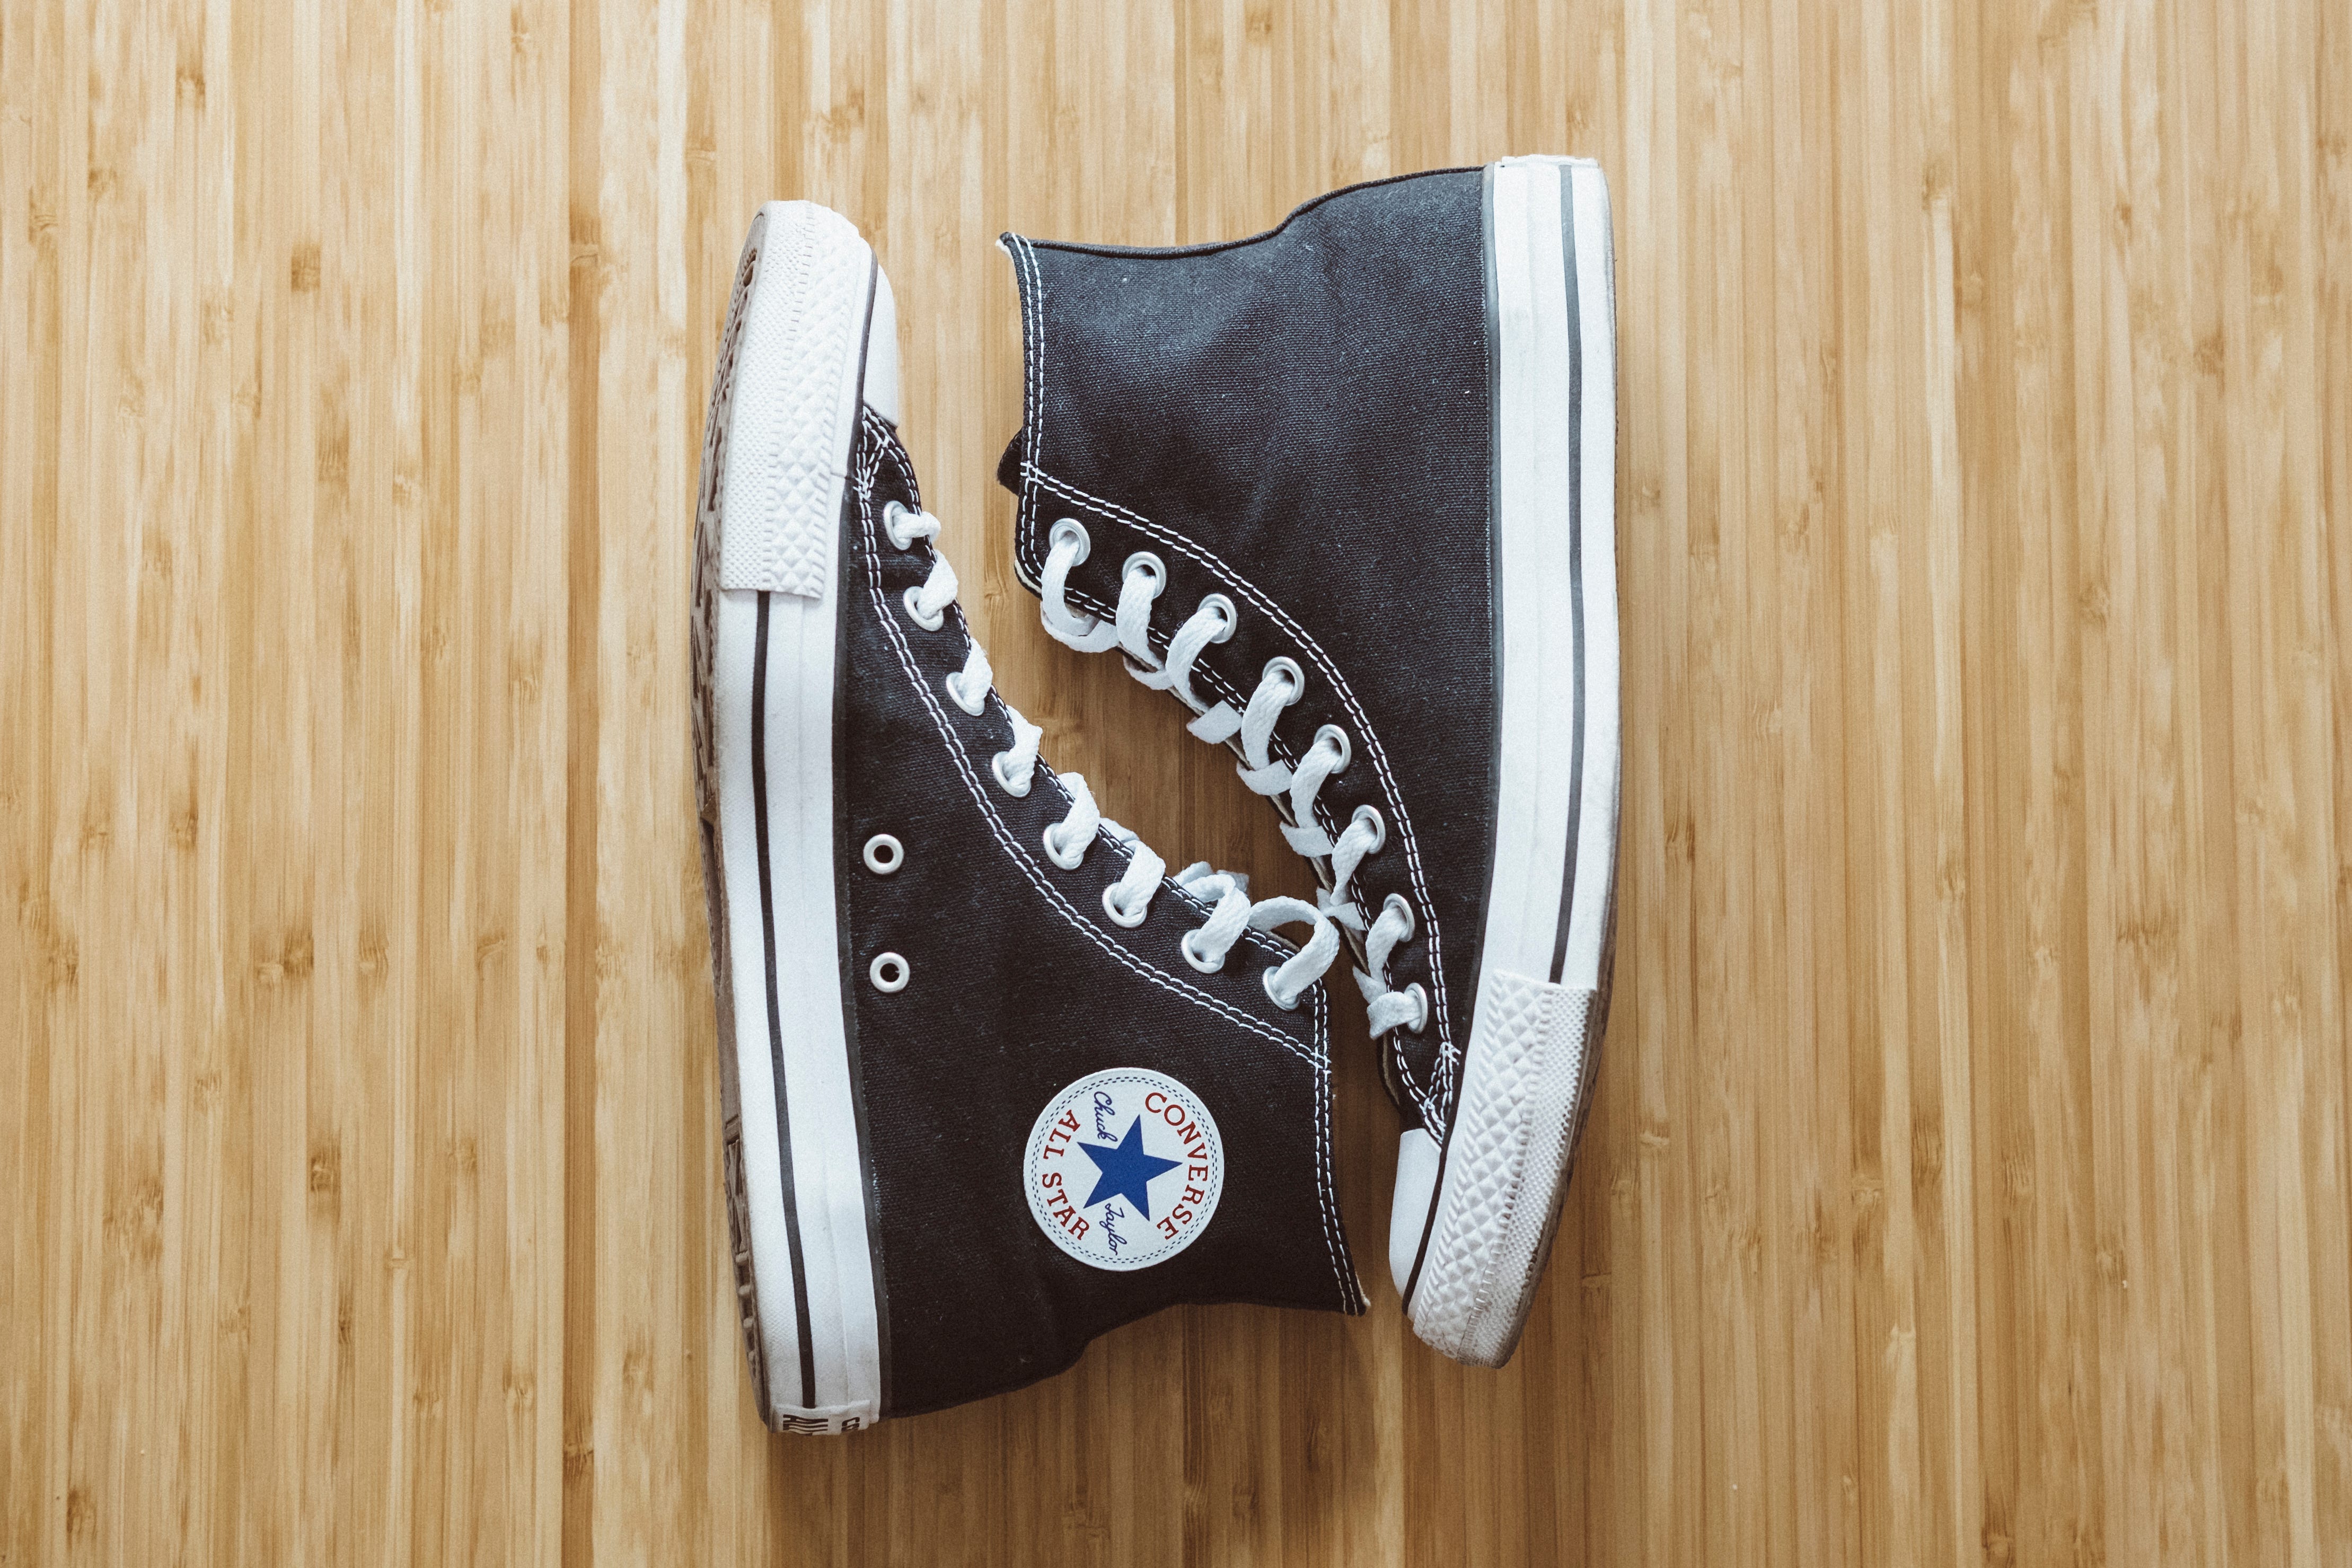 Pair of Chucks Every 43 Seconds 